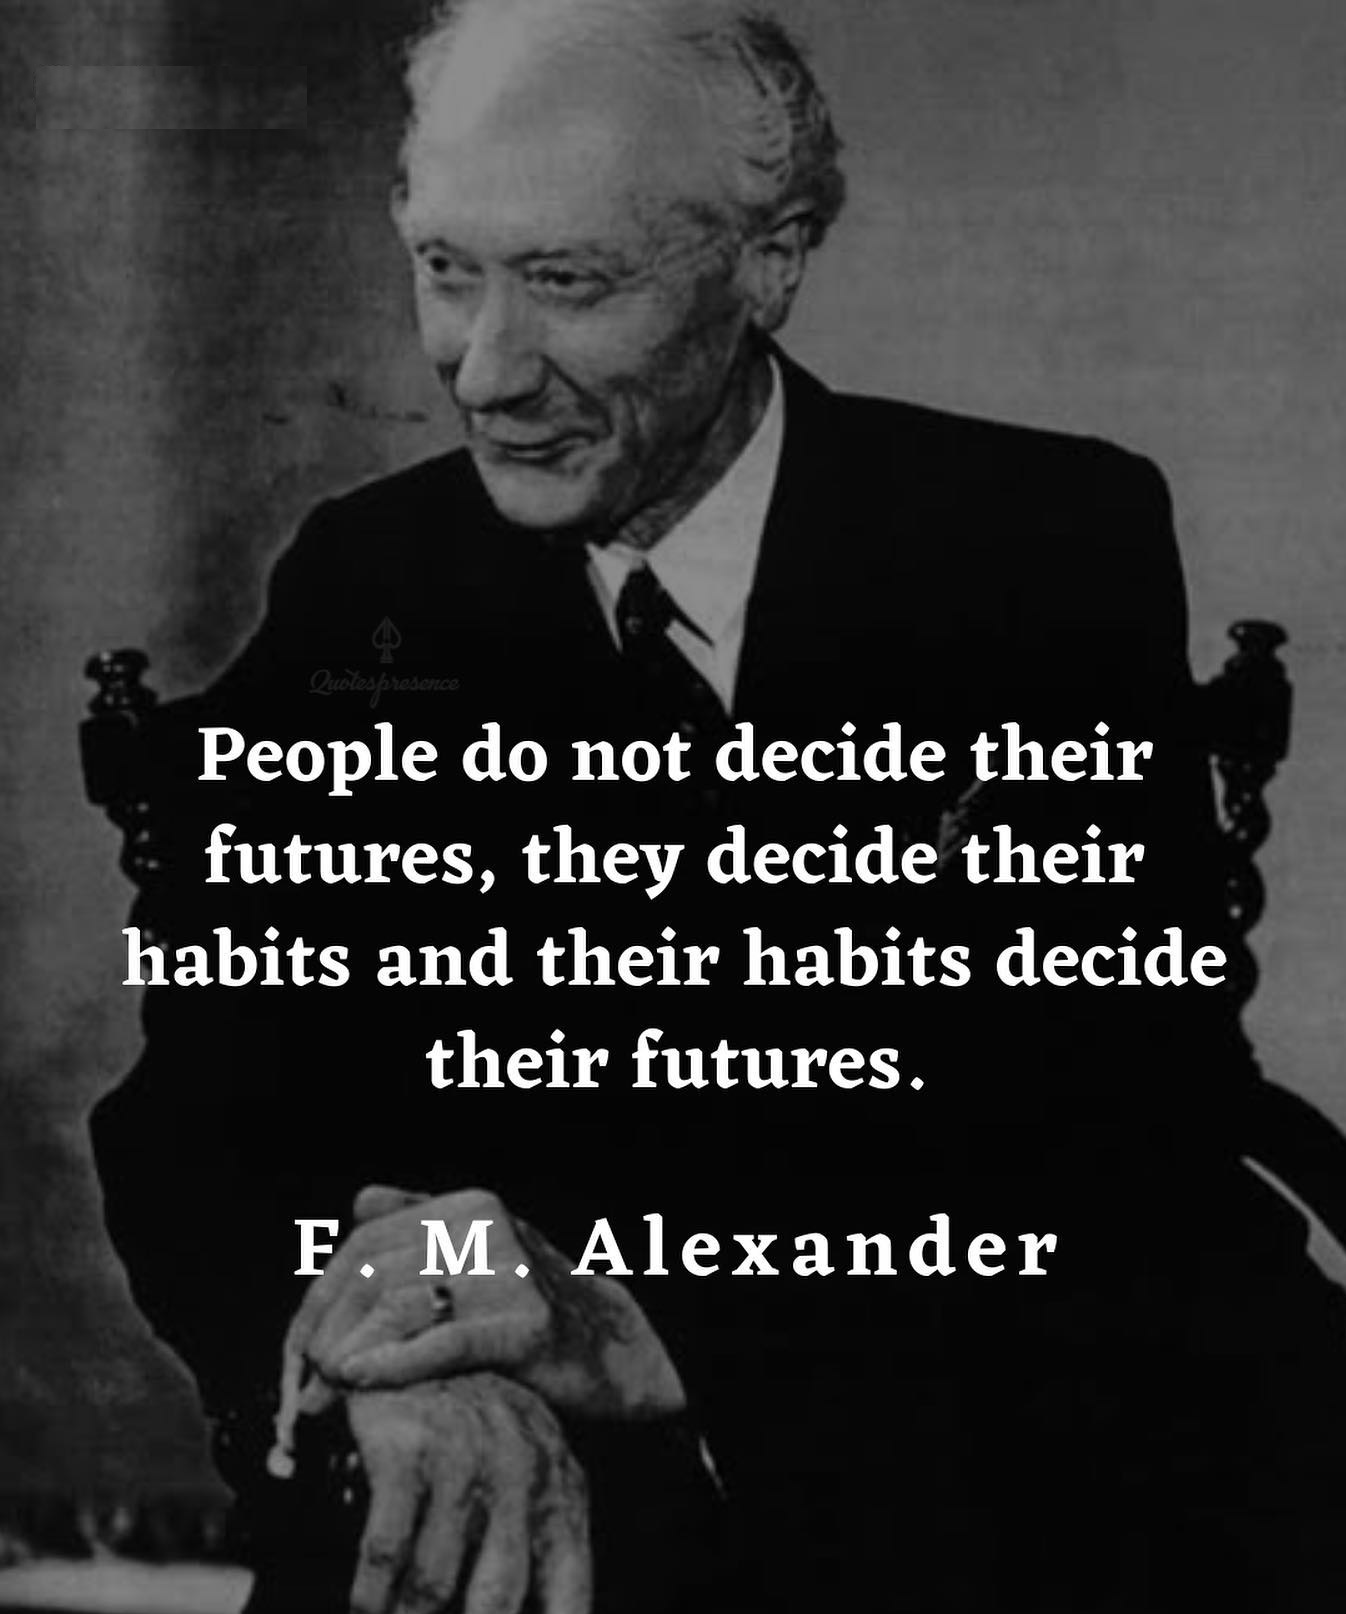 People do not decide their futures, they decide their habits and their habits decide their futures.